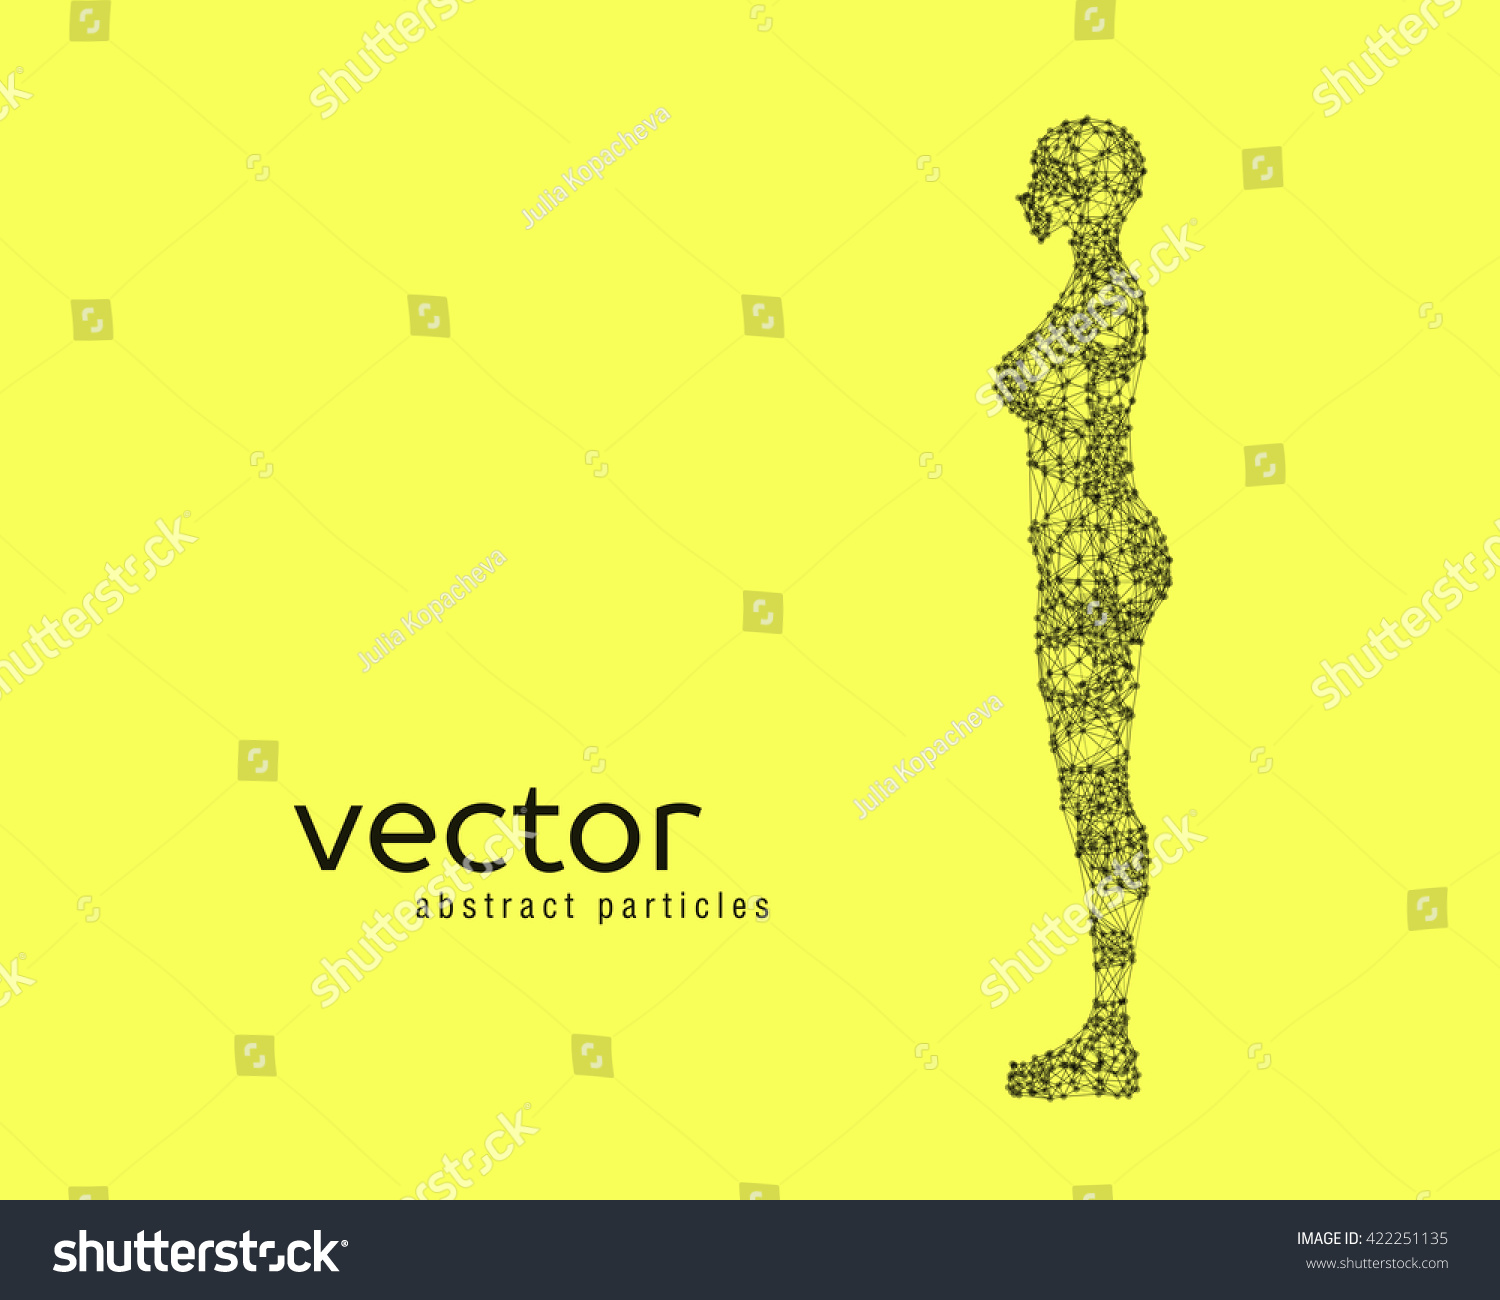 Abstract Vector Illustration Female Body On Stock Vector Royalty Free Shutterstock